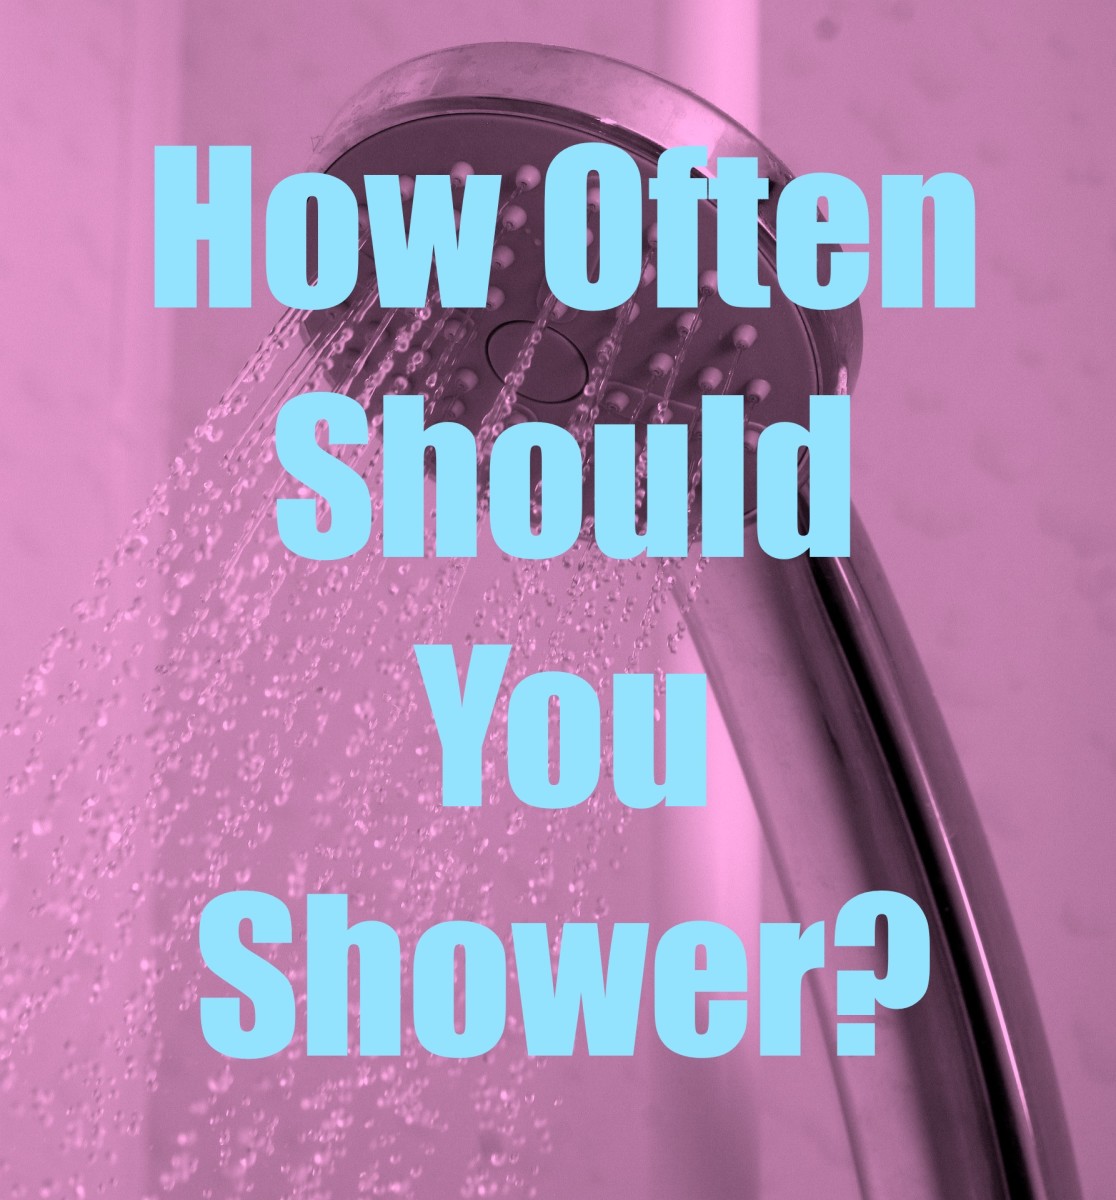 This article explores how often science says you should be showering. Spoiler alert: it's less often than you think!